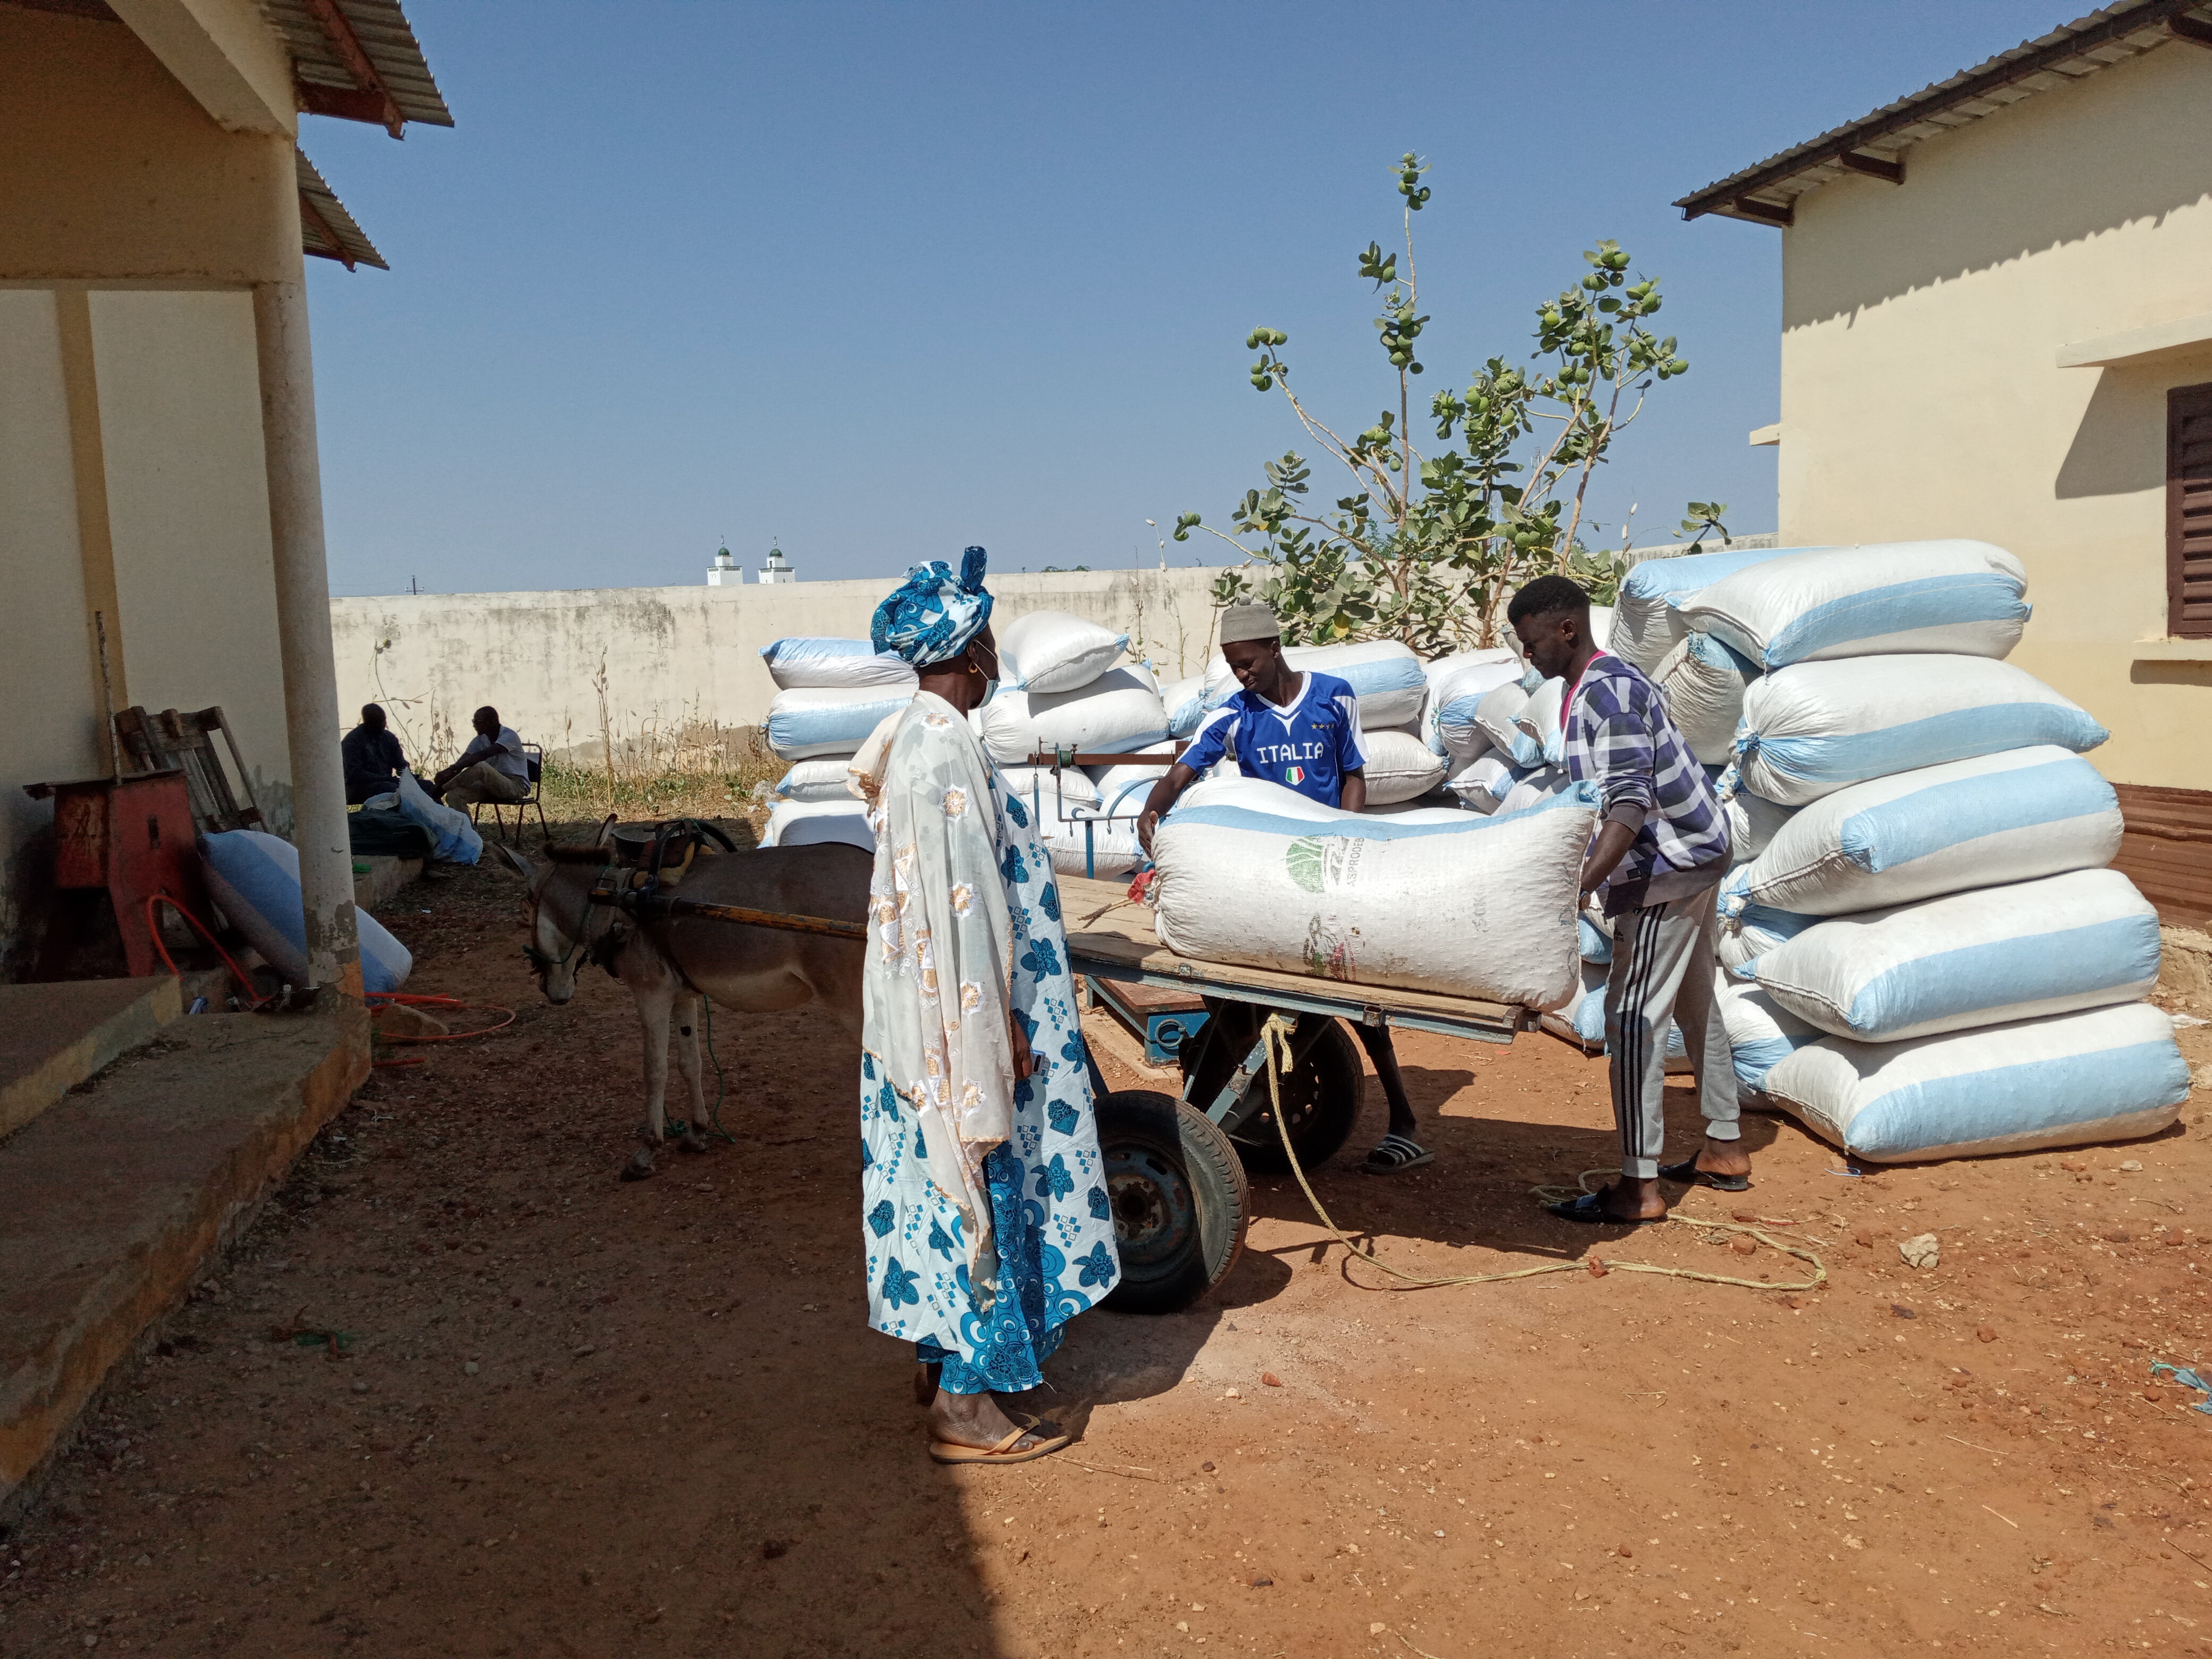 Farmers at the COOPEDELSI cooperative in Senegal